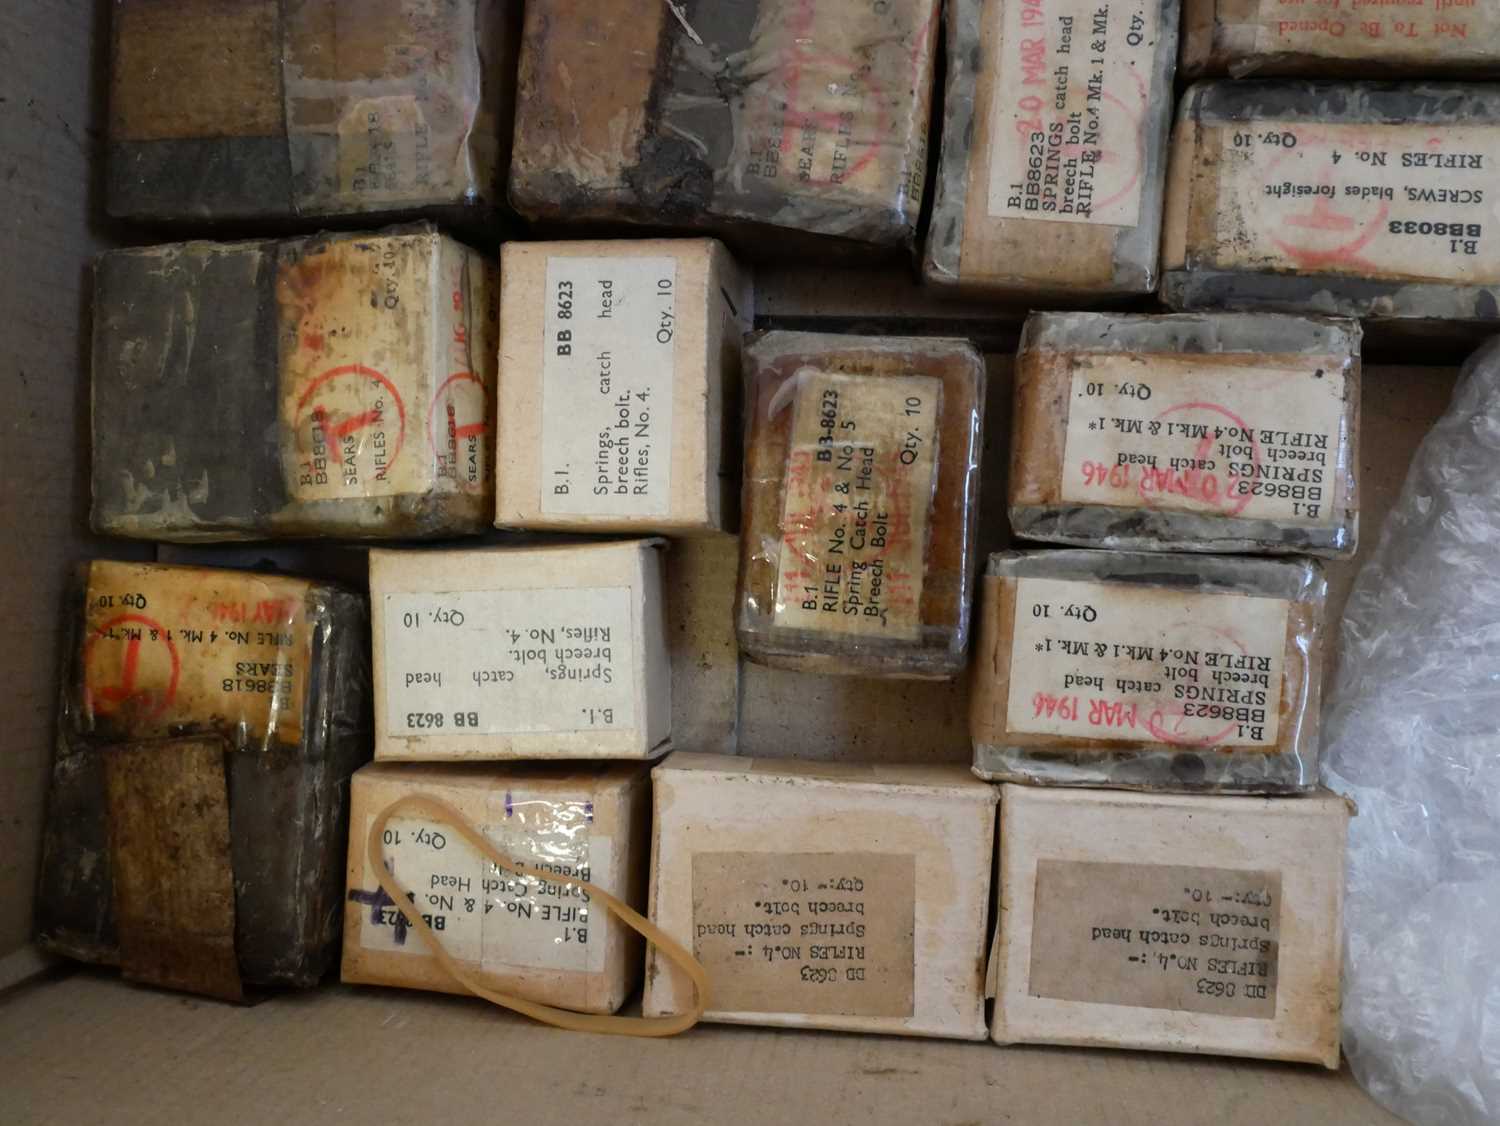 Collection of Lee Enfield SMLE rifle spare parts, some in the original packing boxes. - Image 6 of 7